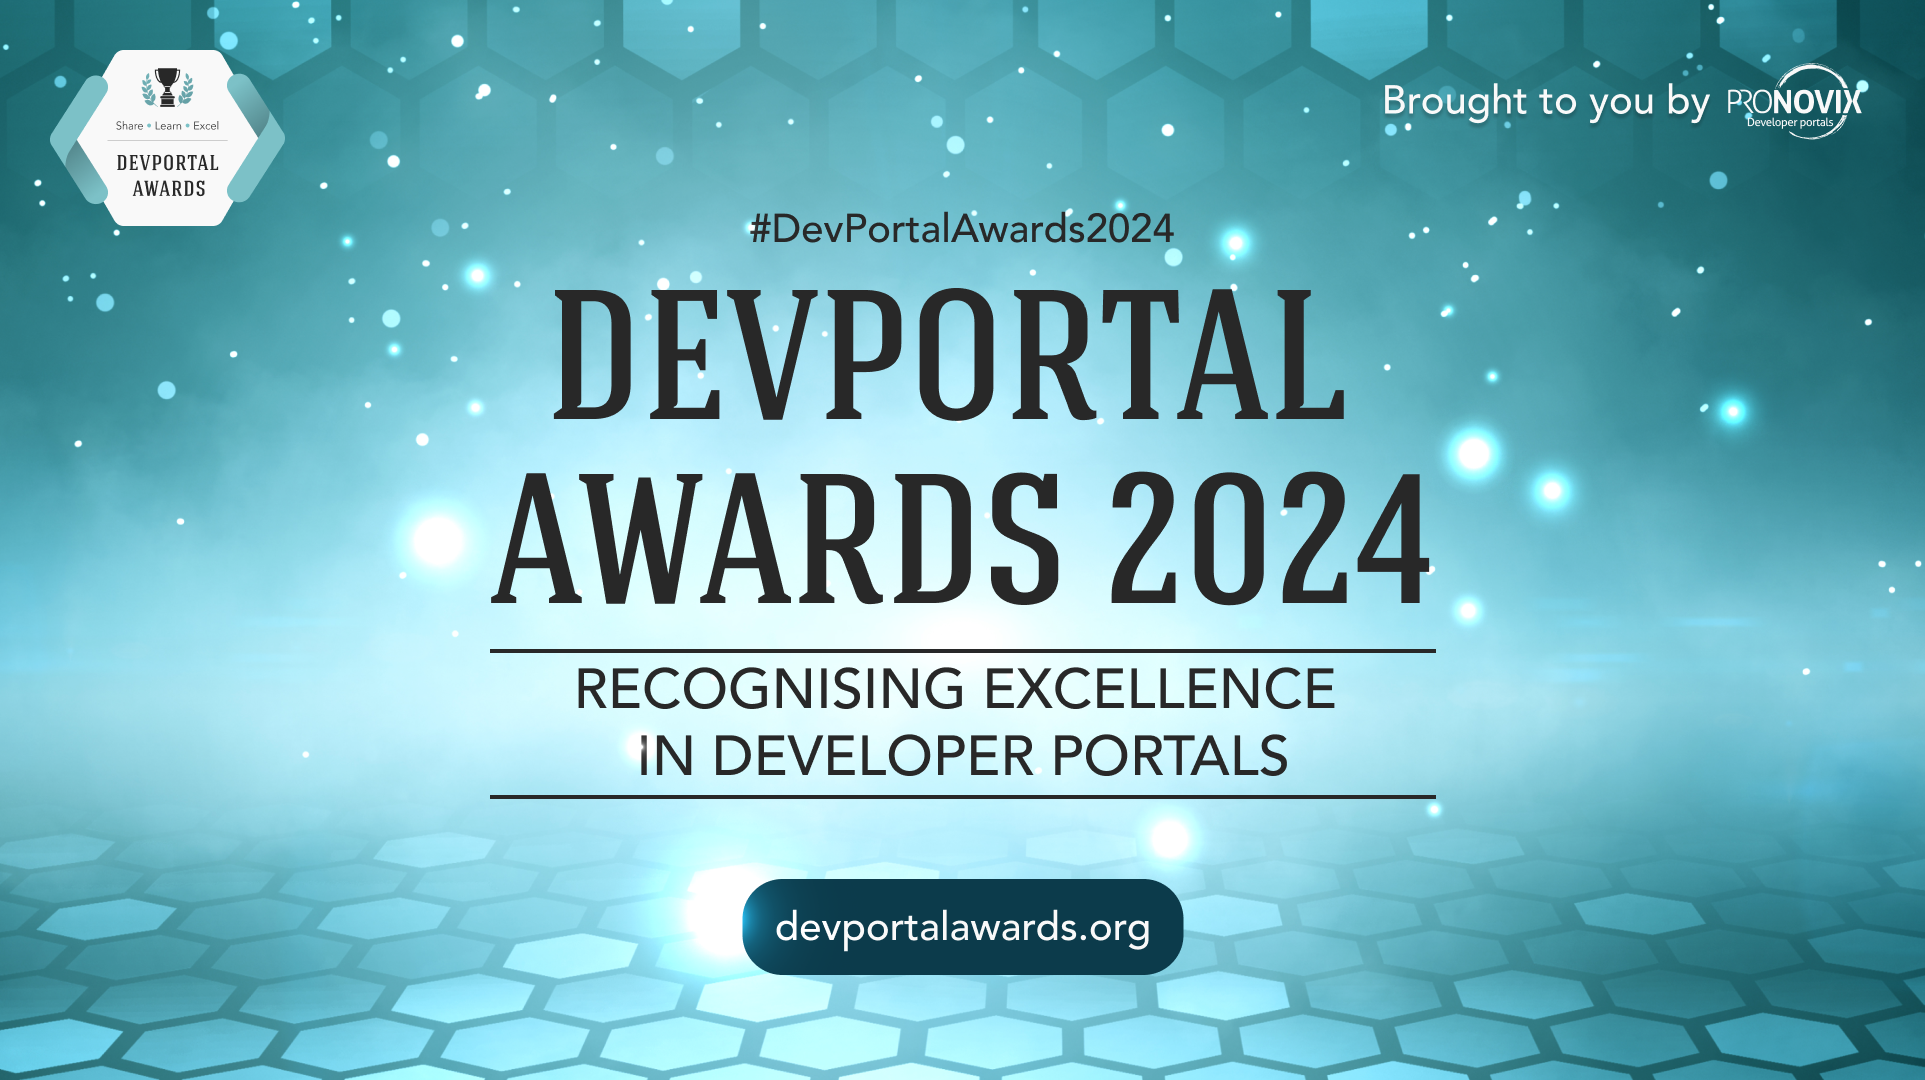 devportal awards motto in a turquoise background with hexagons